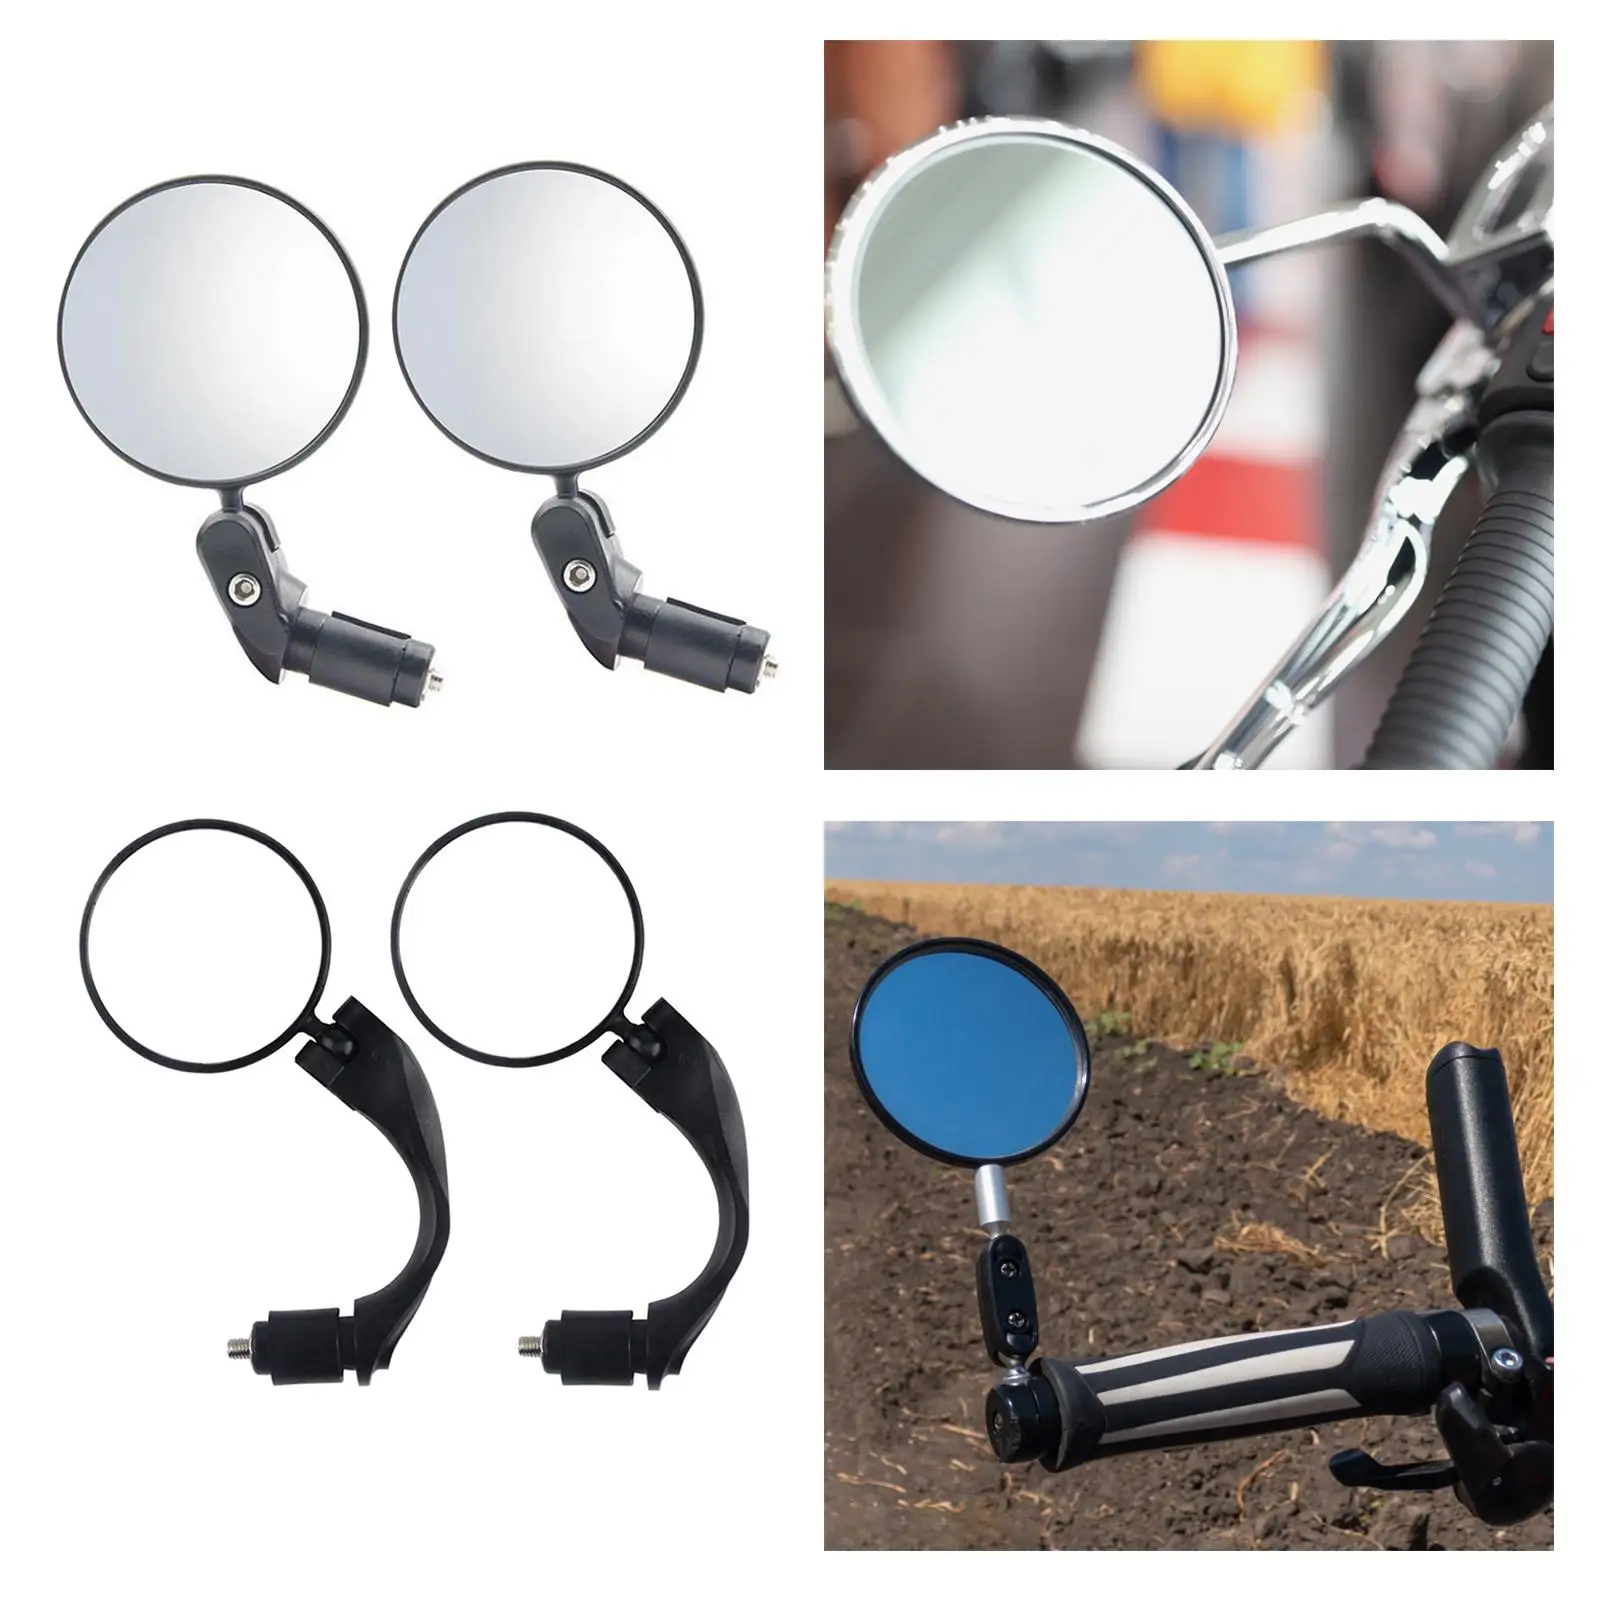 2pcs Bike Rearview Mirror Convex Mirrors Adjustable Bicycle Rear View Mirror